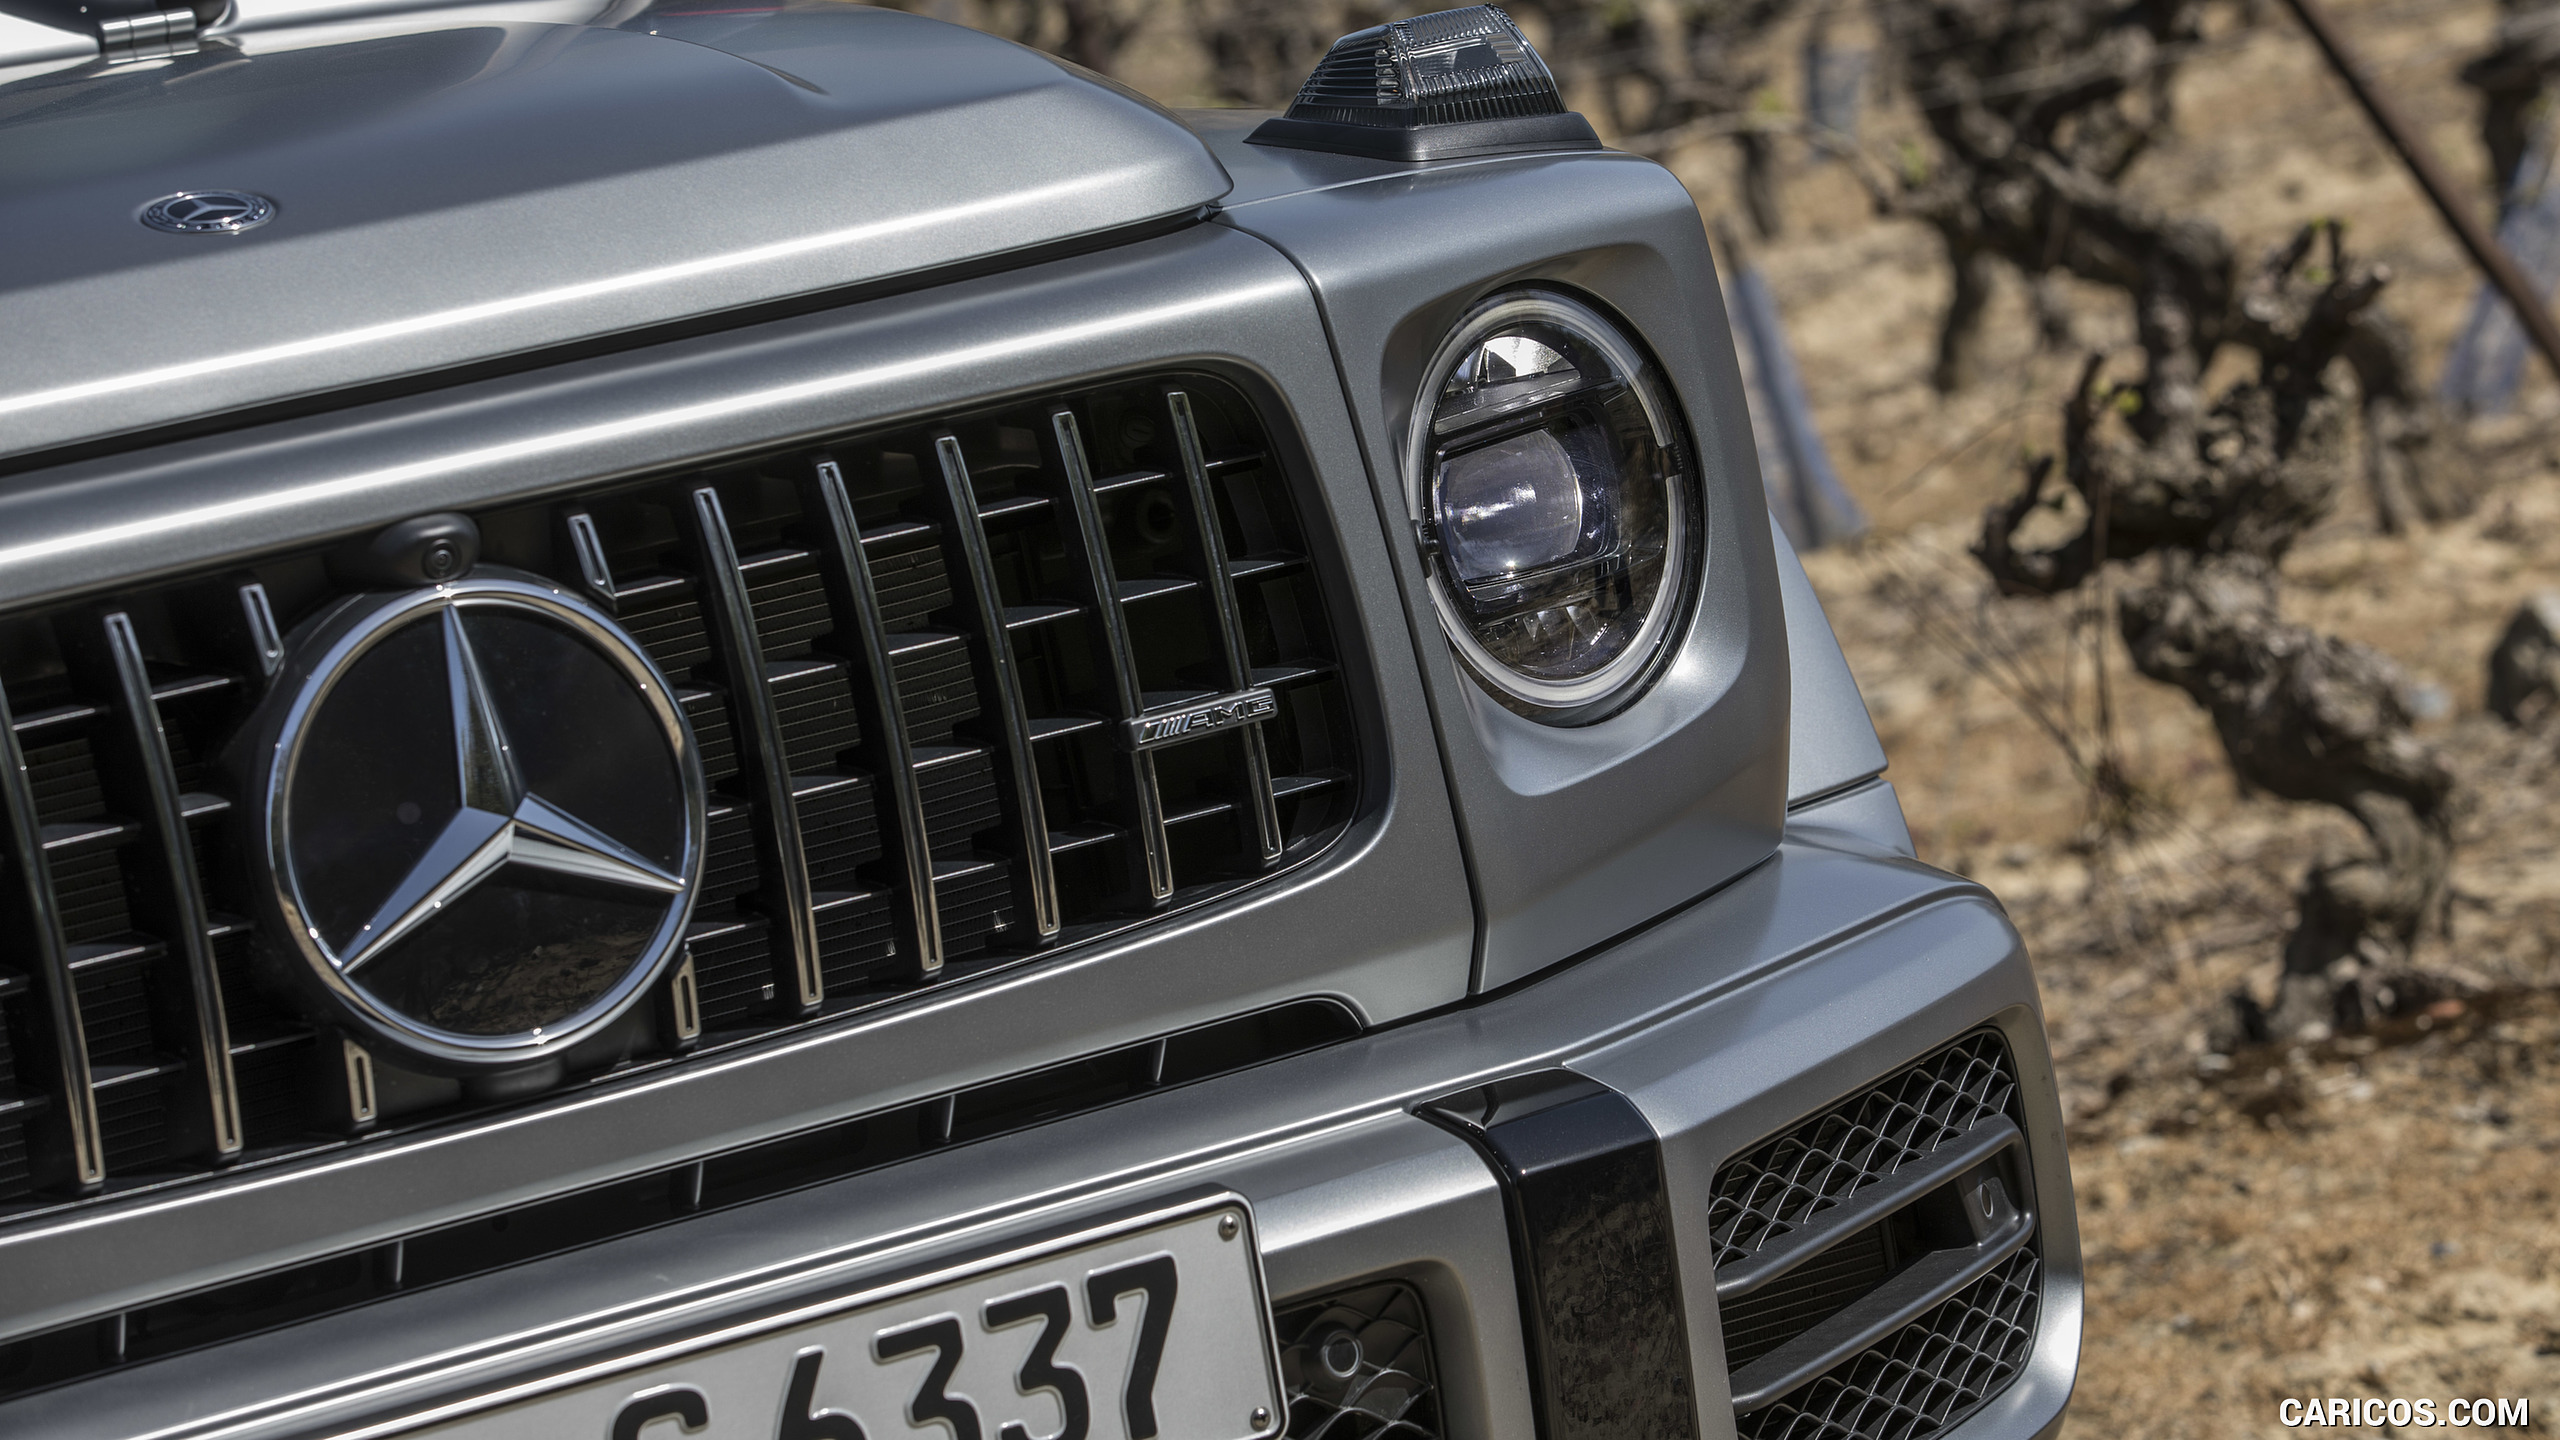 2019 Mercedes-AMG G63 - Grille, #168 of 452